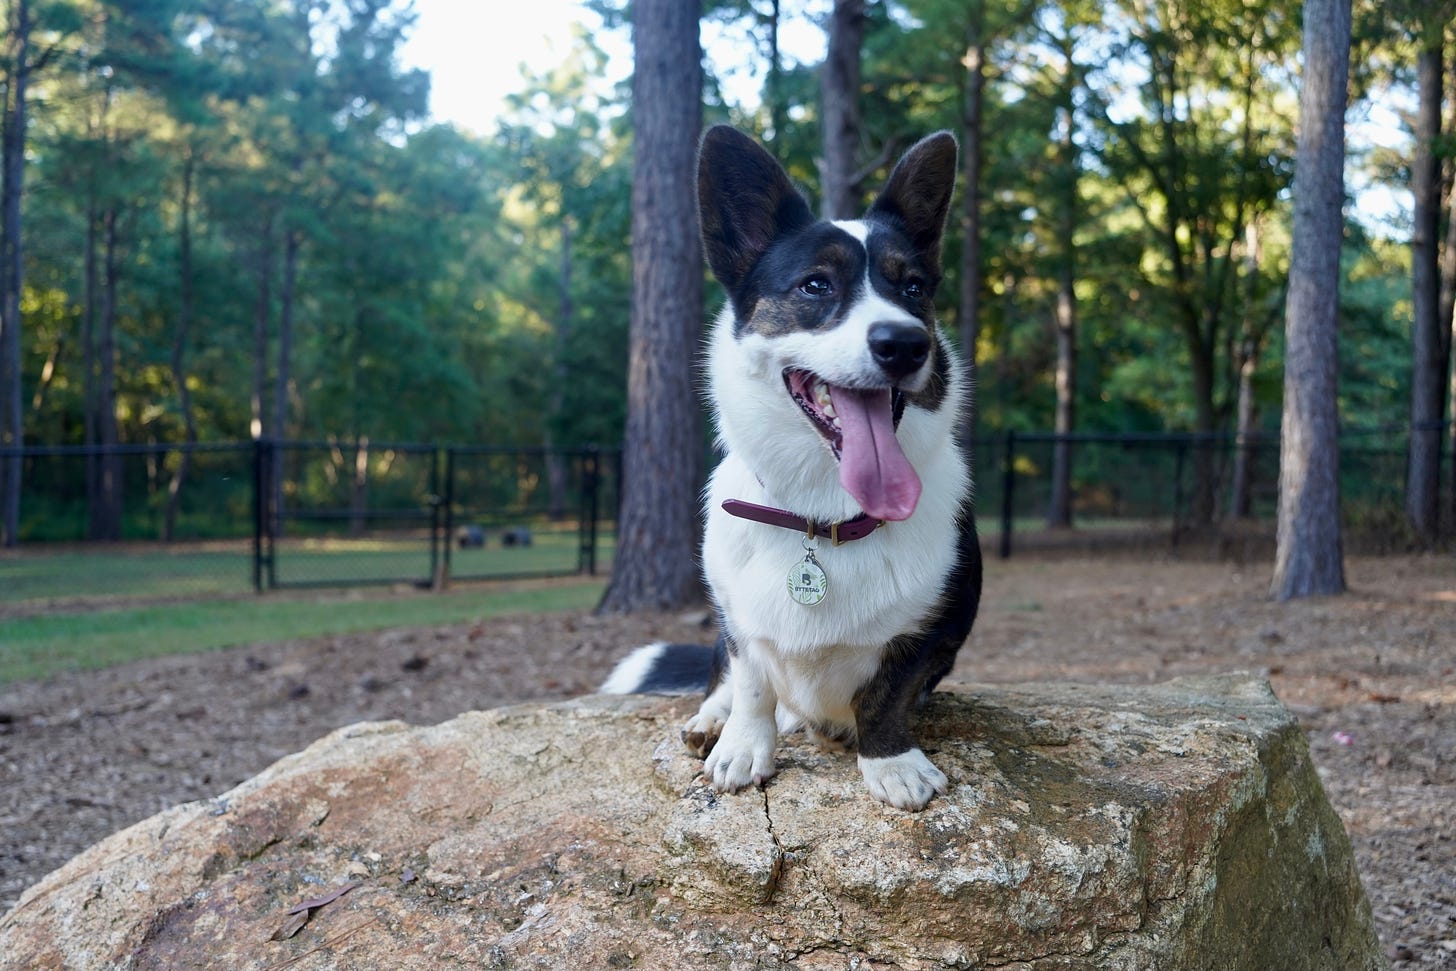  a photo of Gwen, a black and white Cardigan Welsh Corgi, sitting on a large rock at the park. She is smiling at something off camera.